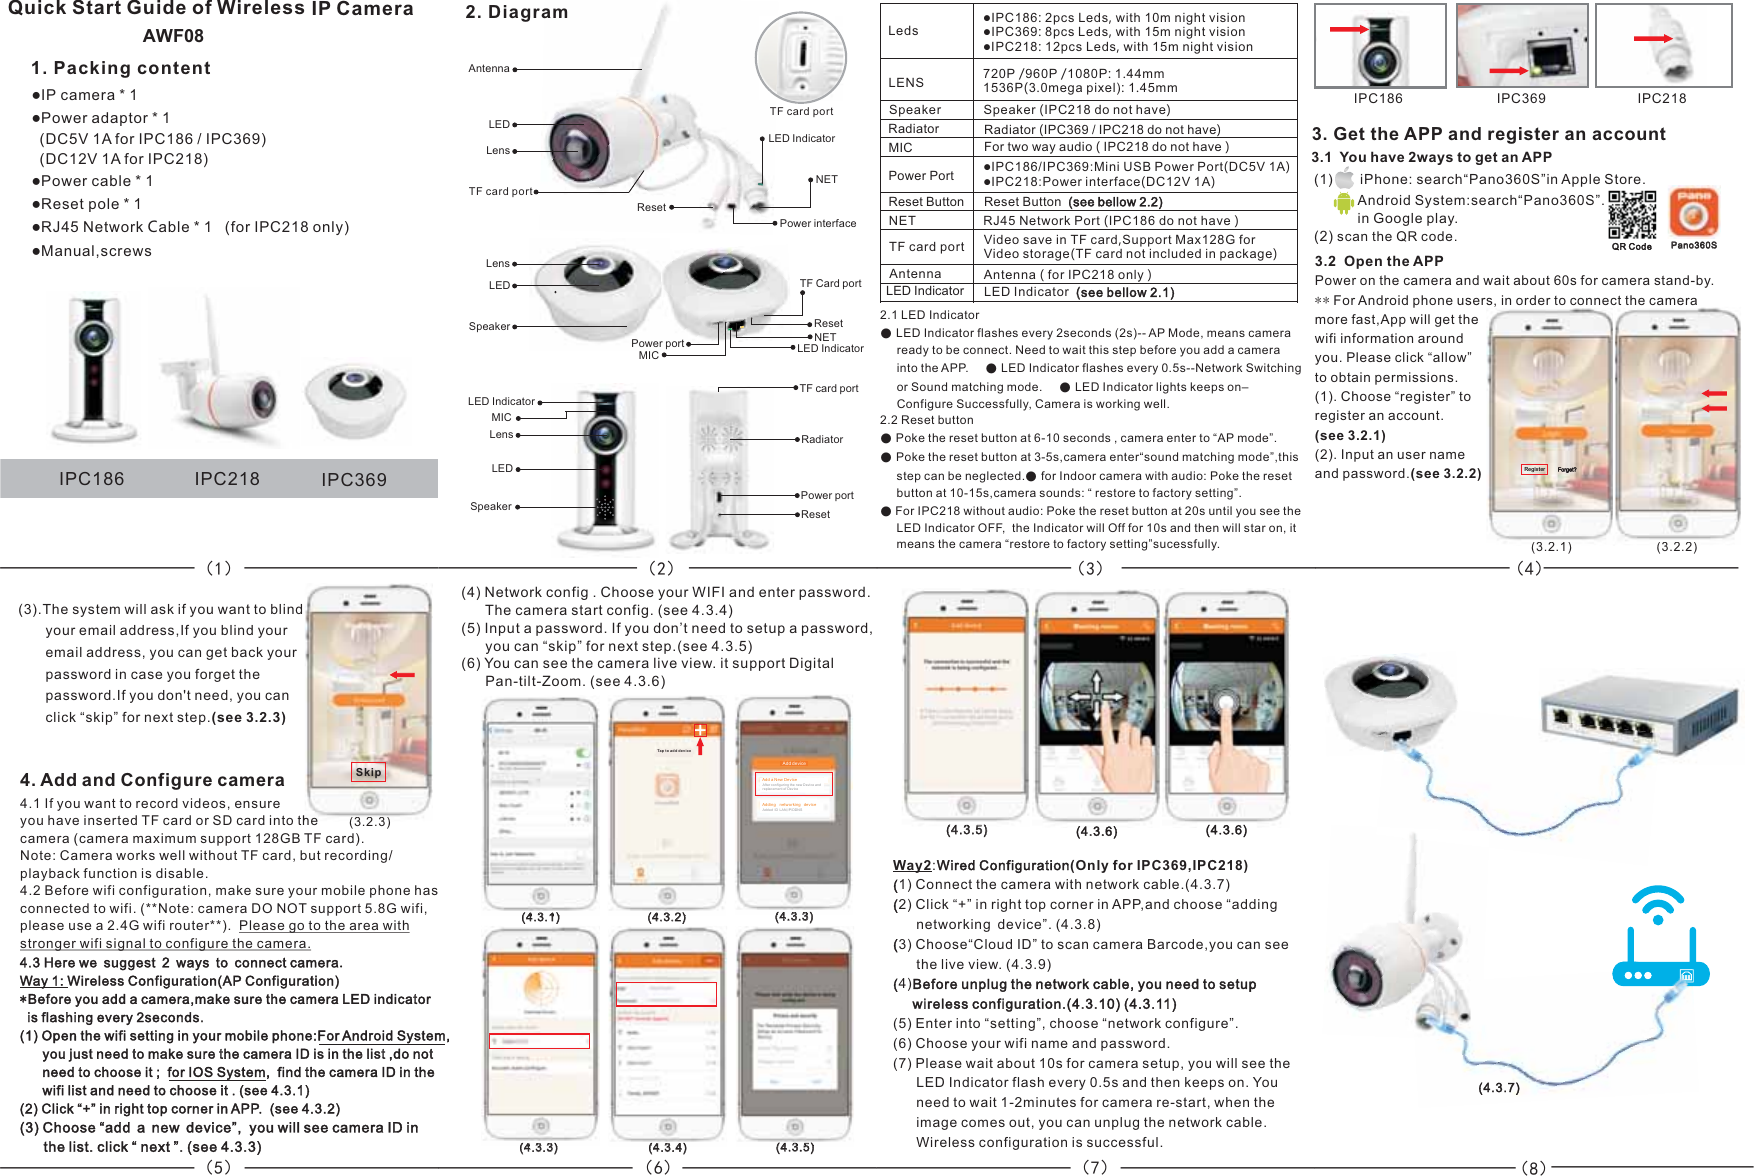 $:)————————— ————（2） （3） （4）（5） （7） （8）——（1）1. Packing contentQuick Start Guide of Wireless IP CameraLeds●IPC186: 2pcs Leds, with 10m night vision●IPC369: 8pcs Leds, with 15m night vision●IPC218: 12pcs Leds, with 15m night visionPower Port ●()●()IPC186/IPC369:Mini USB Power Port DC5V 1AIPC218:Power interface DC12V 1AReset Button Reset Button  ((see bellow 2.2)Antenna Antenna ( for IPC218 only ) LENS 720P /960P /1080P: 1.44mm1536P(3.0mega pixel): 1.45mm3. Get the APP and register an account (1)       iPhone: . search“Pano360S”in Apple StoreAndroid System:.search“Pano360S”.in Google play(2) scan the QR code.3.1  You have 2ways to get an APP    Pano360S3.2  Open the APP(1). .(see 3.2.1) (2). .(see 3.2.2)Power on the camera and wait about 60s for camera stand-by.** For Android phone users, in order to connect the camera more fast,App will get the wifi information around you. Please click “allow” to obtain permissions.Choose “register” to register an accountInput an user name and password4.1 If you want to record videos, ensure you have inserted TF card or SD card into the camera (camera maximum support 128GB TF card).  Note: Camera works well without TF card, but recording/playback function is disable.4.2 Before wifi configuration, make sure your mobile phone has connected to wifi. (**Note: camera DO NOT support 5.8G wifi, please use a 2.4G wifi router**).  Please go to the area with stronger wifi signal to configure the camera.  (3).The system will ask if you want to blind        your email address,If you blind your        email address, you can get back your        password in case you forget the        password.If you don&apos;t need, you can        click “skip” for next step.(see 3.2.3)  (3.2.1)   (3.2.2)  4. Add and Configure camera6) (4) Network config . Choose your WIFI and enter password.        The camera start config. (see 4.3.4)(5) (see 4.3.5)       Pan-tilt-Zoom. (see 4.3.6) Input a password. If you don’t need to setup a password,       you can “skip” for next step.( You can see the camera live view. it support Digital —（6）●IP camera * 1●Power adaptor  1(DC5V 1A for IPC186 / IPC369  DC12V 1A for IPC218)●Power cable  1●Reset pole  1RJ45 Network Cable 1   (for IPC218 only)●Manual,screws* )(* * ● * (321)RegisterForget?(3 2 2)NET RJ45 Network Port (IPC186 do not have ) (3.2.3)  he(3 2 3)SkipRadiator Radiator  IPC369 / IPC218 do not have()Video save in TF card,Support Max128G for Video storage(TF card not included in package)TF card portWay2:(Only for IPC369,IPC218)1) Connect the camera with network cable.(4.3.7)2) Click “+” in right top corner in APP,and choose “addingnetworking device”. (4.3.8)3) Choose“Cloud ID” to scan camera Barcode,you can seethe live view. (4.3.9)4)Wired Configuration(((( Before unplug the network cable, you need to setup      wireless configuration.(4.3.10) (4.3.11) (5) Enter into “setting”, choose “network configure”.(6) Choose your wifi name and password.(7) Please wait about 10s for camera setup, you will see the       LED Indicator flash every 0.5s and then keeps on. You       need to wait 1-2minutes for camera re-start, when the       image comes out, you can unplug the network cable.       Wireless configuration is successful.2. DiagramSpeakerLEDLensTF card portLensLEDSpeakerLEDLensResetPower portRadiatorLED IndicatorPower port NETTF Card portLED IndicatorNETPower interfaceIPC186 IPC218 IPC369AntennaTF card portResetResetMICTF card portSpeaker Speaker (IPC218 )do not haveLED Indicator LED Indicator  ((see bellow 2.1) MIC For two way audio ( IPC218 do not have )LED IndicatorMICQR Code(4.3.5)  (435)(4.3.1)   (4.3.2)   (4.3.4)  (432)(4.3.3)  (431)Tap to a dd devi ce(4.3.5)  (433)(434)(435)2.1 LED Indicator ●LED Indicator flashes every 2seconds (2s)-- AP Mode, means cameraready to be connect. Need to wait this step before you add a camerainto the APP.     ● LED Indicator flashes every 0.5s--Network Switchingor Sound matching mode.     ● LED Indicator lights keeps on–Configure Successfully, Camera is working well.●Poke the reset button at 3-5s,camera enter“sound matching mode”,thisstep can be neglected.● for Indoor camera with audio: Poke the resetbutton at 10-15s,camera sounds: “ restore to factory setting”.●For IPC218 without audio: Poke the reset button at 20s until you see theLED Indicator OFF,  the Indicator will Off for 10s and then will star on, itmeans the camera “restore to factory setting”sucessfully.2.2 Reset button●Poke the reset button at 6-10 seconds , camera enter to “AP mode”.      4.3 Here we suggest 2 ways to connect camera.Way 1: Wireless Configuration(AP Configuration)*Before you add a camera,make sure the camera LED indicatoris flashing every 2seconds.(1) Open the wifi setting in your mobile phone:For Android System,       you just need to make sure the camera ID is in the list ,do not      need to choose it ;  for IOS System,  find the camera ID in the       wifi list and need to choose it . (see 4.3.1)(2) Click “+” in right top corner in APP.  (see 4.3.2)(3) Choose “add a new device”,  you will see camera ID in       the list. click “ next ”. (see 4.3.3)+(4.3.6)   (4.3.6)  (4.3.7)  IPC186 IPC369 IPC218(4.3.3)  (433)Add a New DeviceAfter configuring the new Device andreplacement of DeviceAdding networking  deviceAdded ID LAN IP DDNS,/Add device